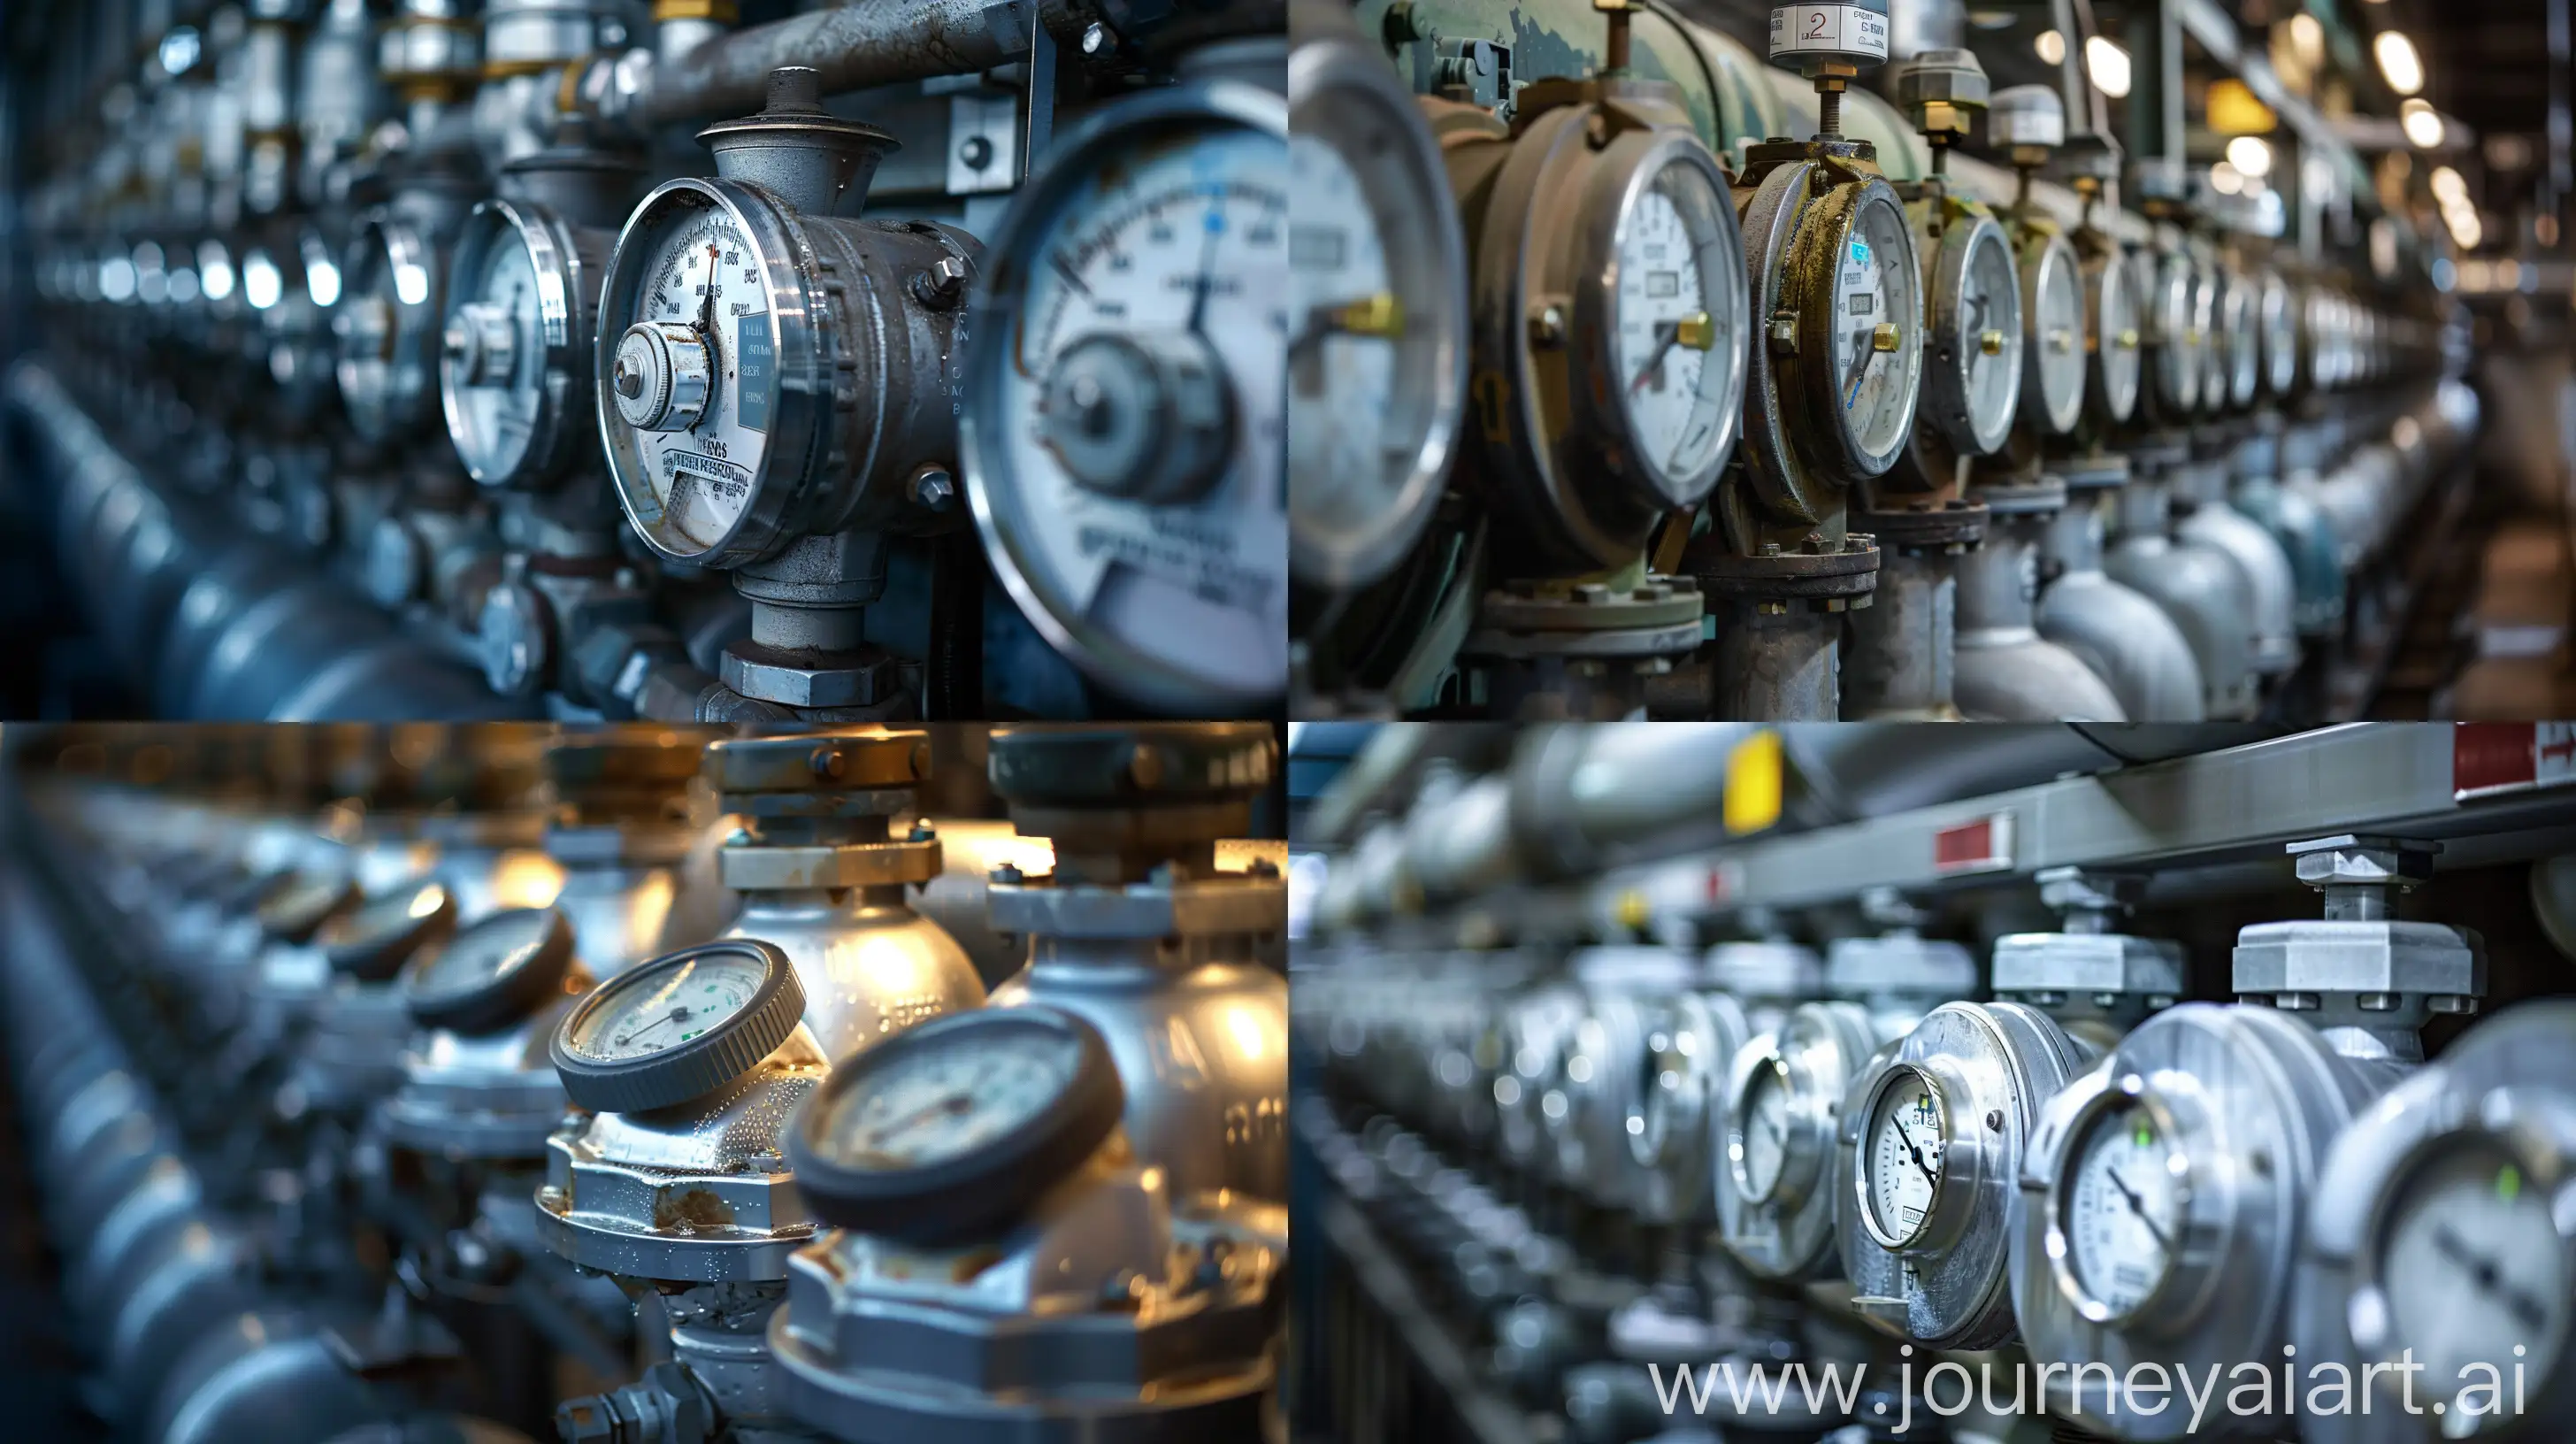 A high-resolution photograph capturing the durability and longevity of water meters. The image depicts a row of water meters installed within an industrial setting, showcasing their robust construction and reliable functionality over time. Each meter is meticulously positioned to emphasize its individuality while collectively illustrating their enduring performance. The composition highlights the precision engineering and resilience of these devices, with intricate details visible upon closer inspection. The lighting accentuates the metallic surfaces, casting dynamic shadows that add depth and dimension to the scene. Despite the passage of time, these water meters stand as symbols of reliability and efficiency in utility management.  --ar 16:9 